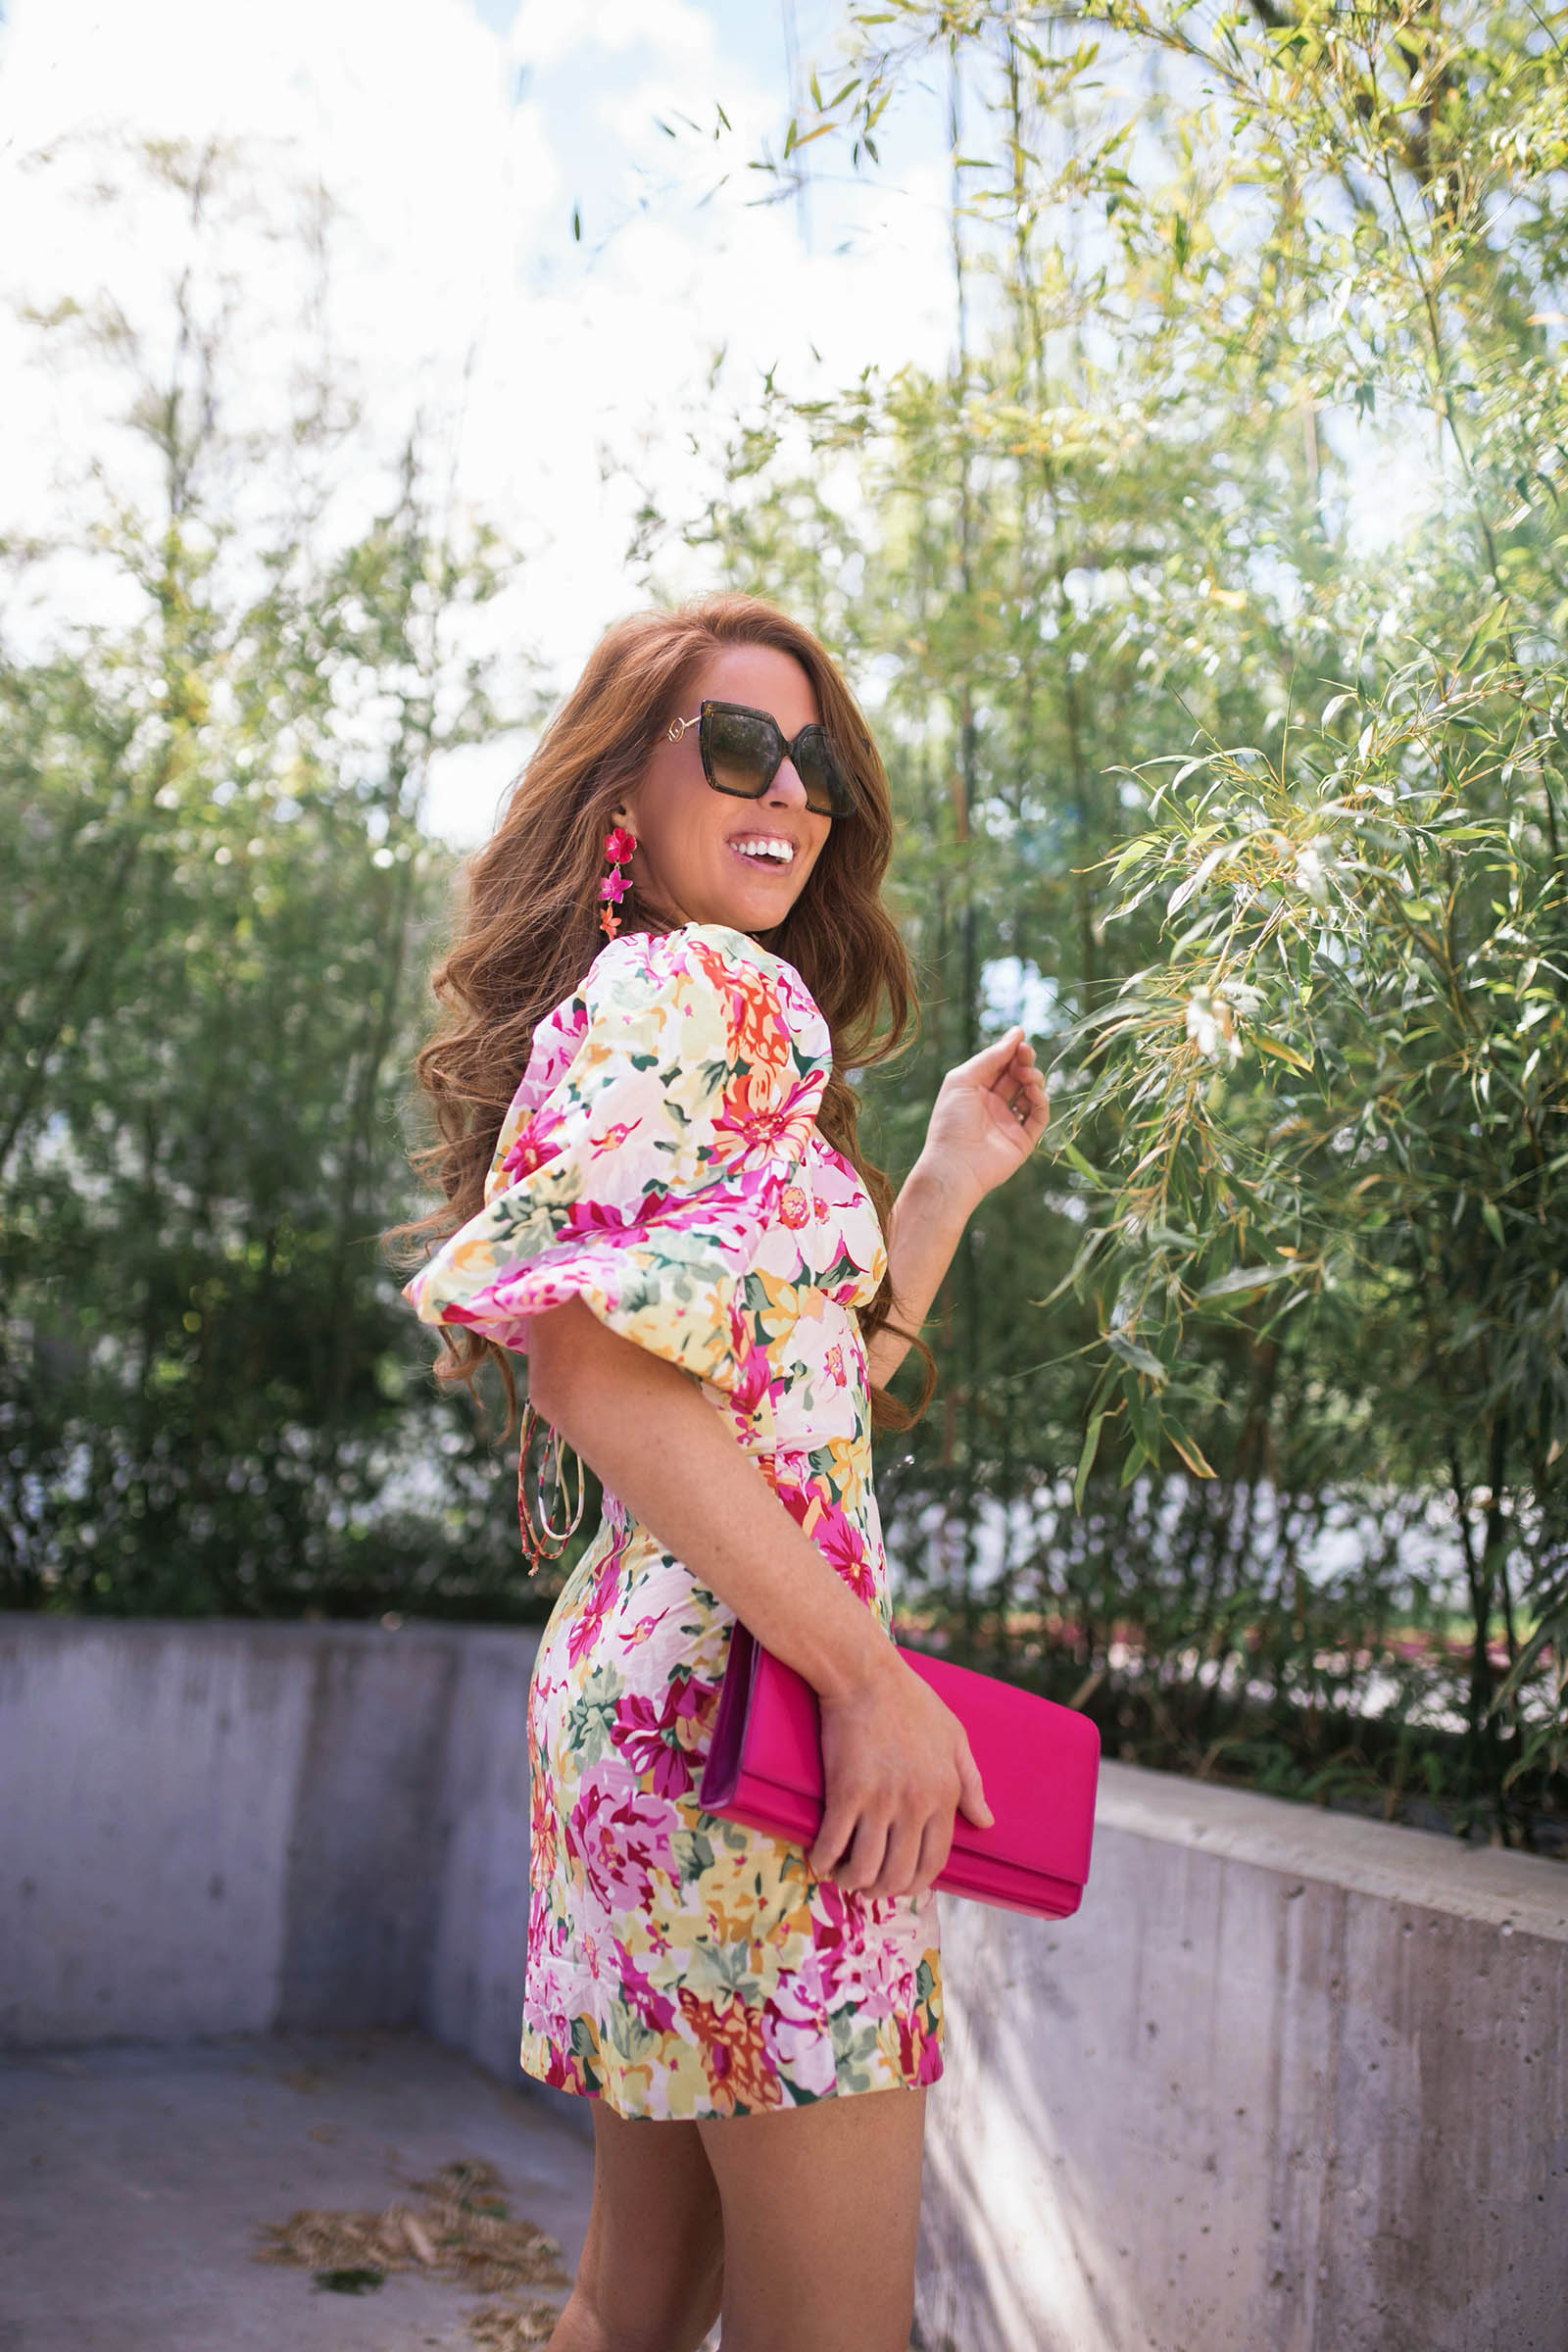 Floral Statement Sleeve Dress - Jimmy Choos & Tennis Shoes